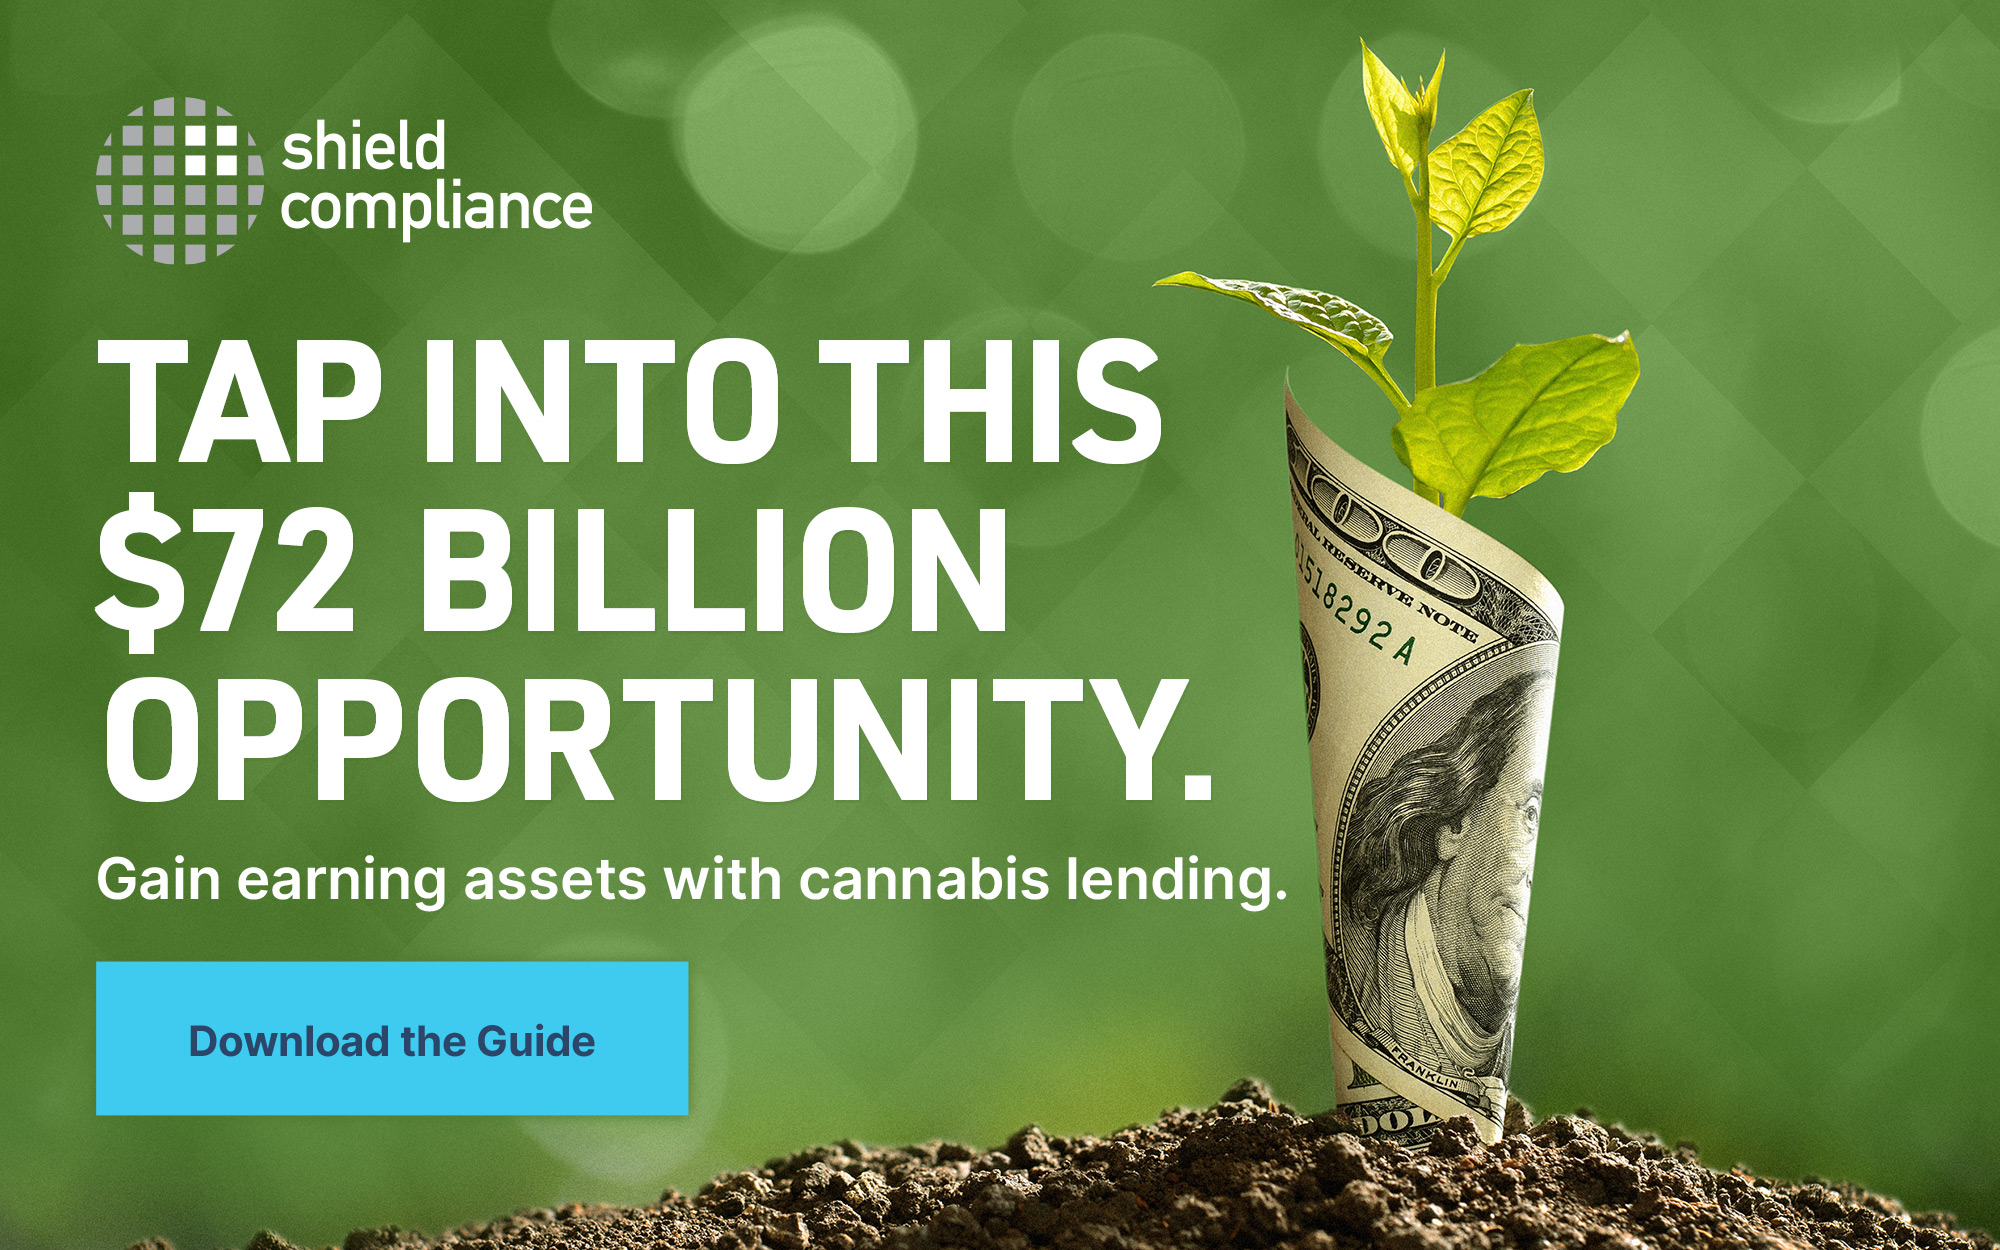 sheild compliance featured July sponsored article